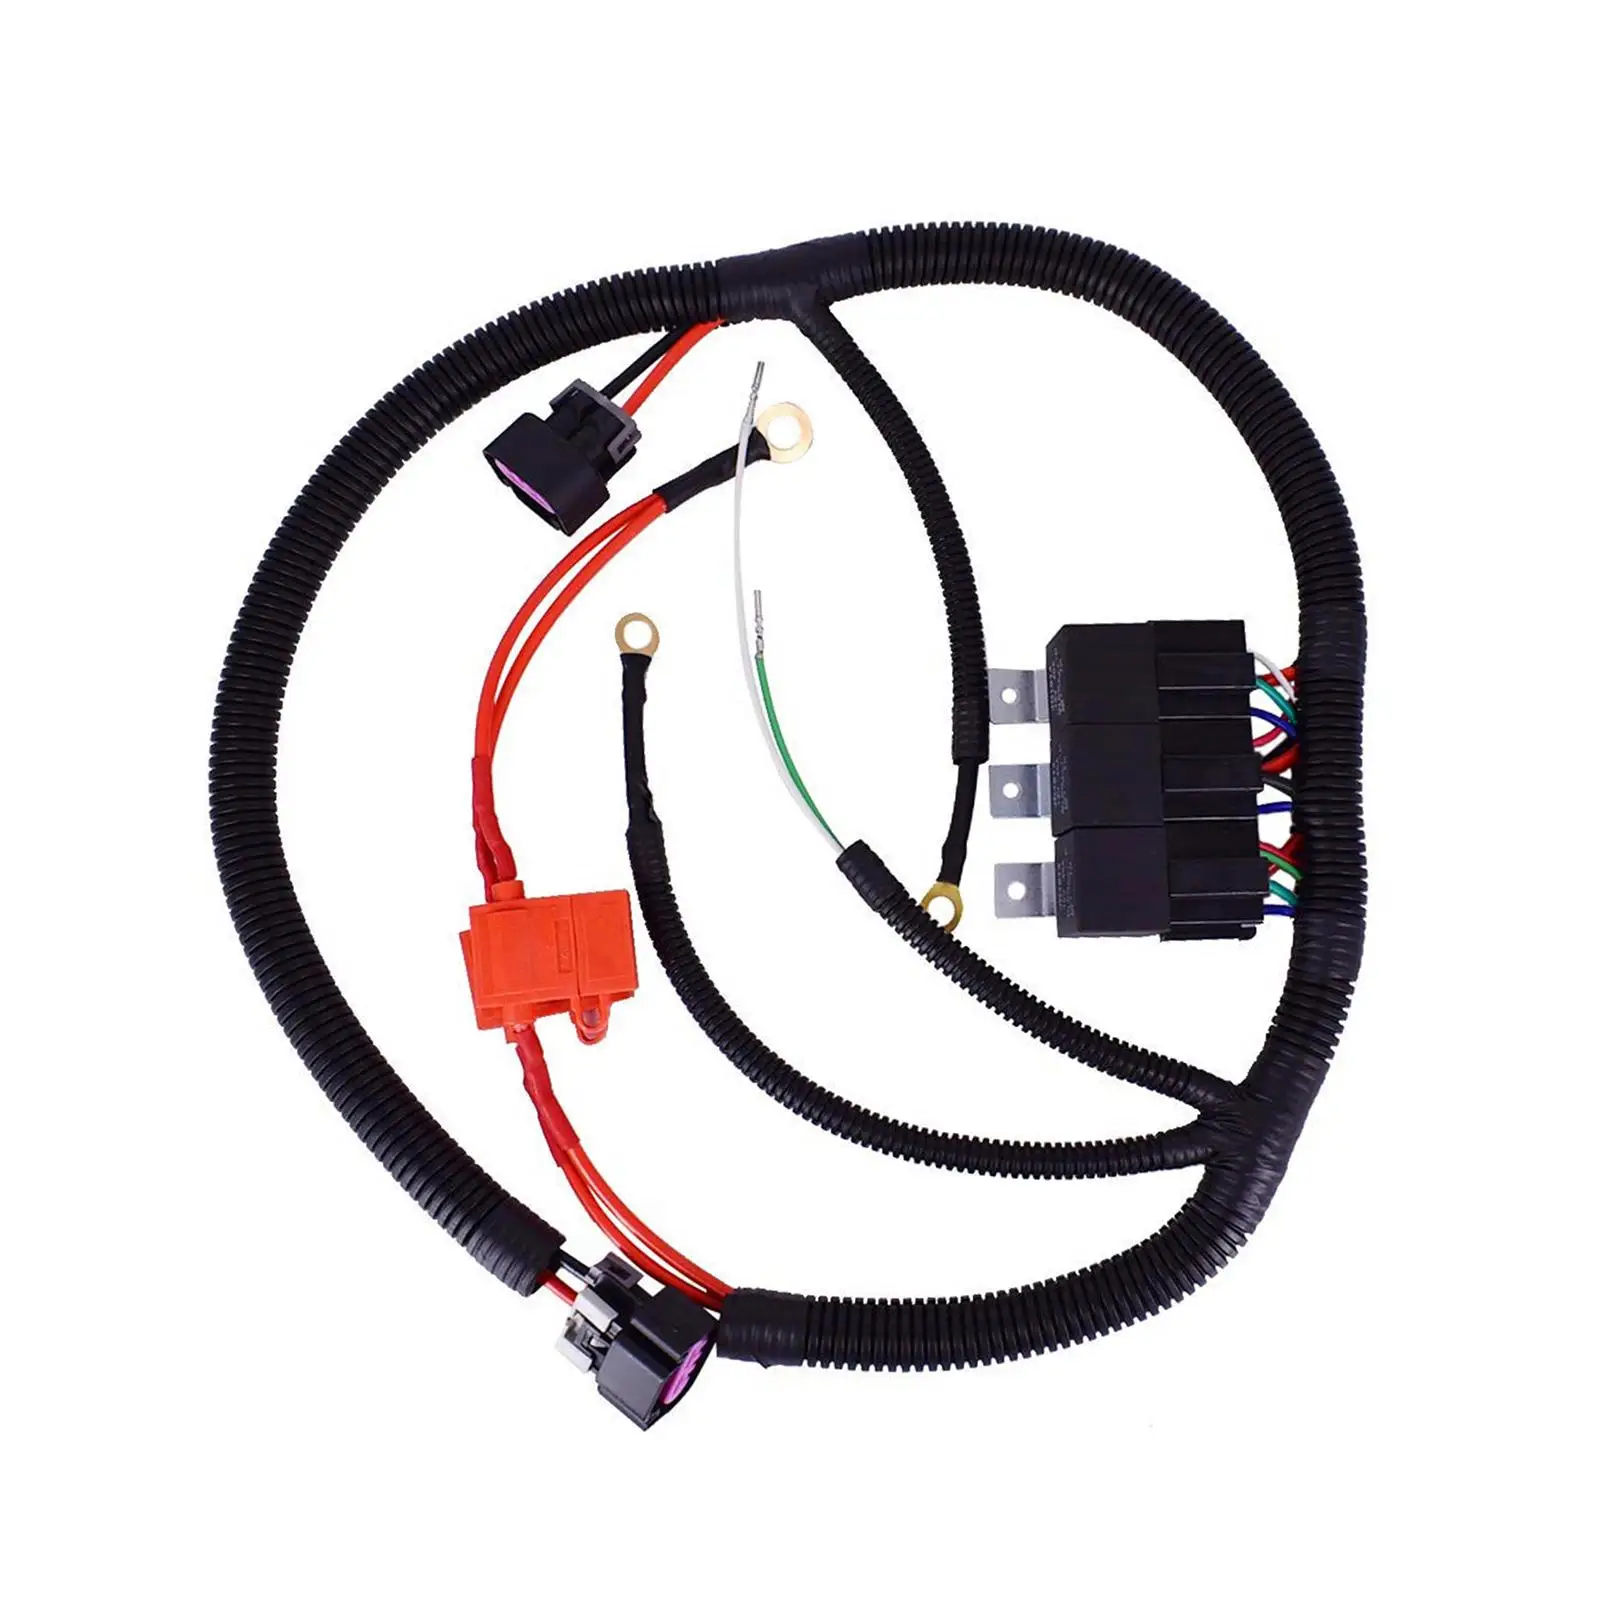 Dual Electric Fan Upgrade Wiring Harness Kit 7L5533A226T Durable Automotive